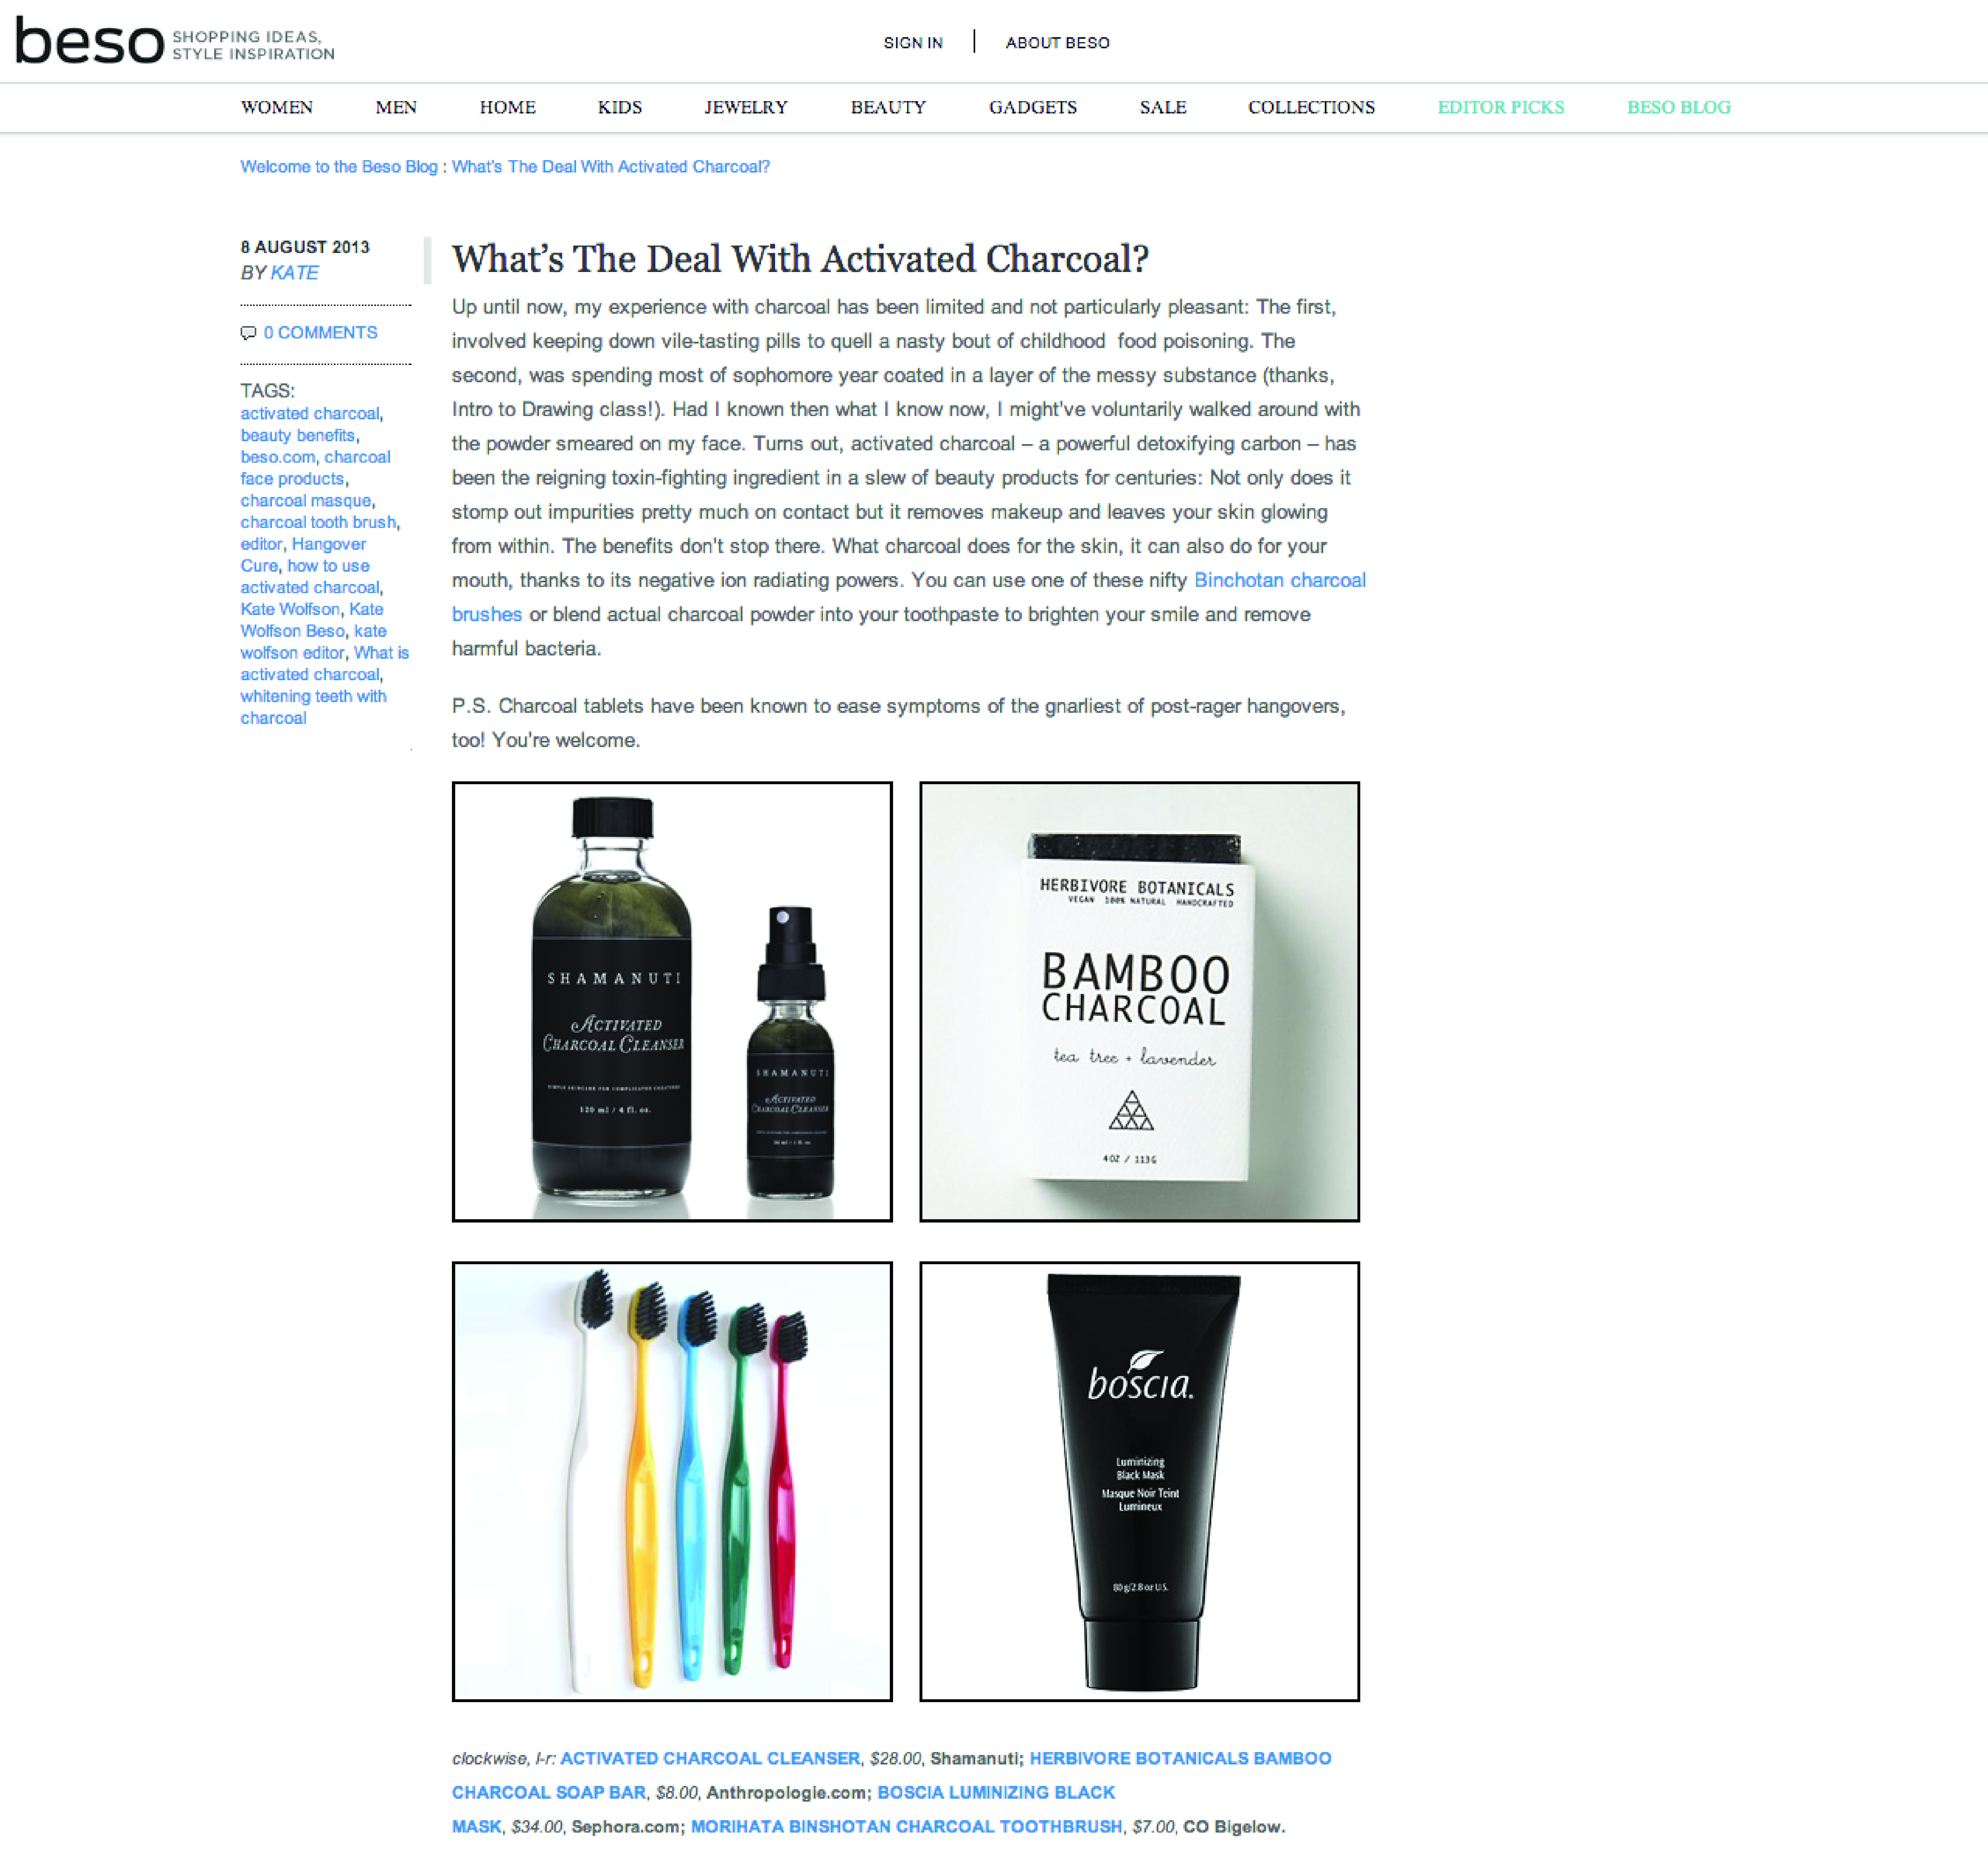 What's The Deal With Activated Charcoal? by Kate Wolfson for Beso